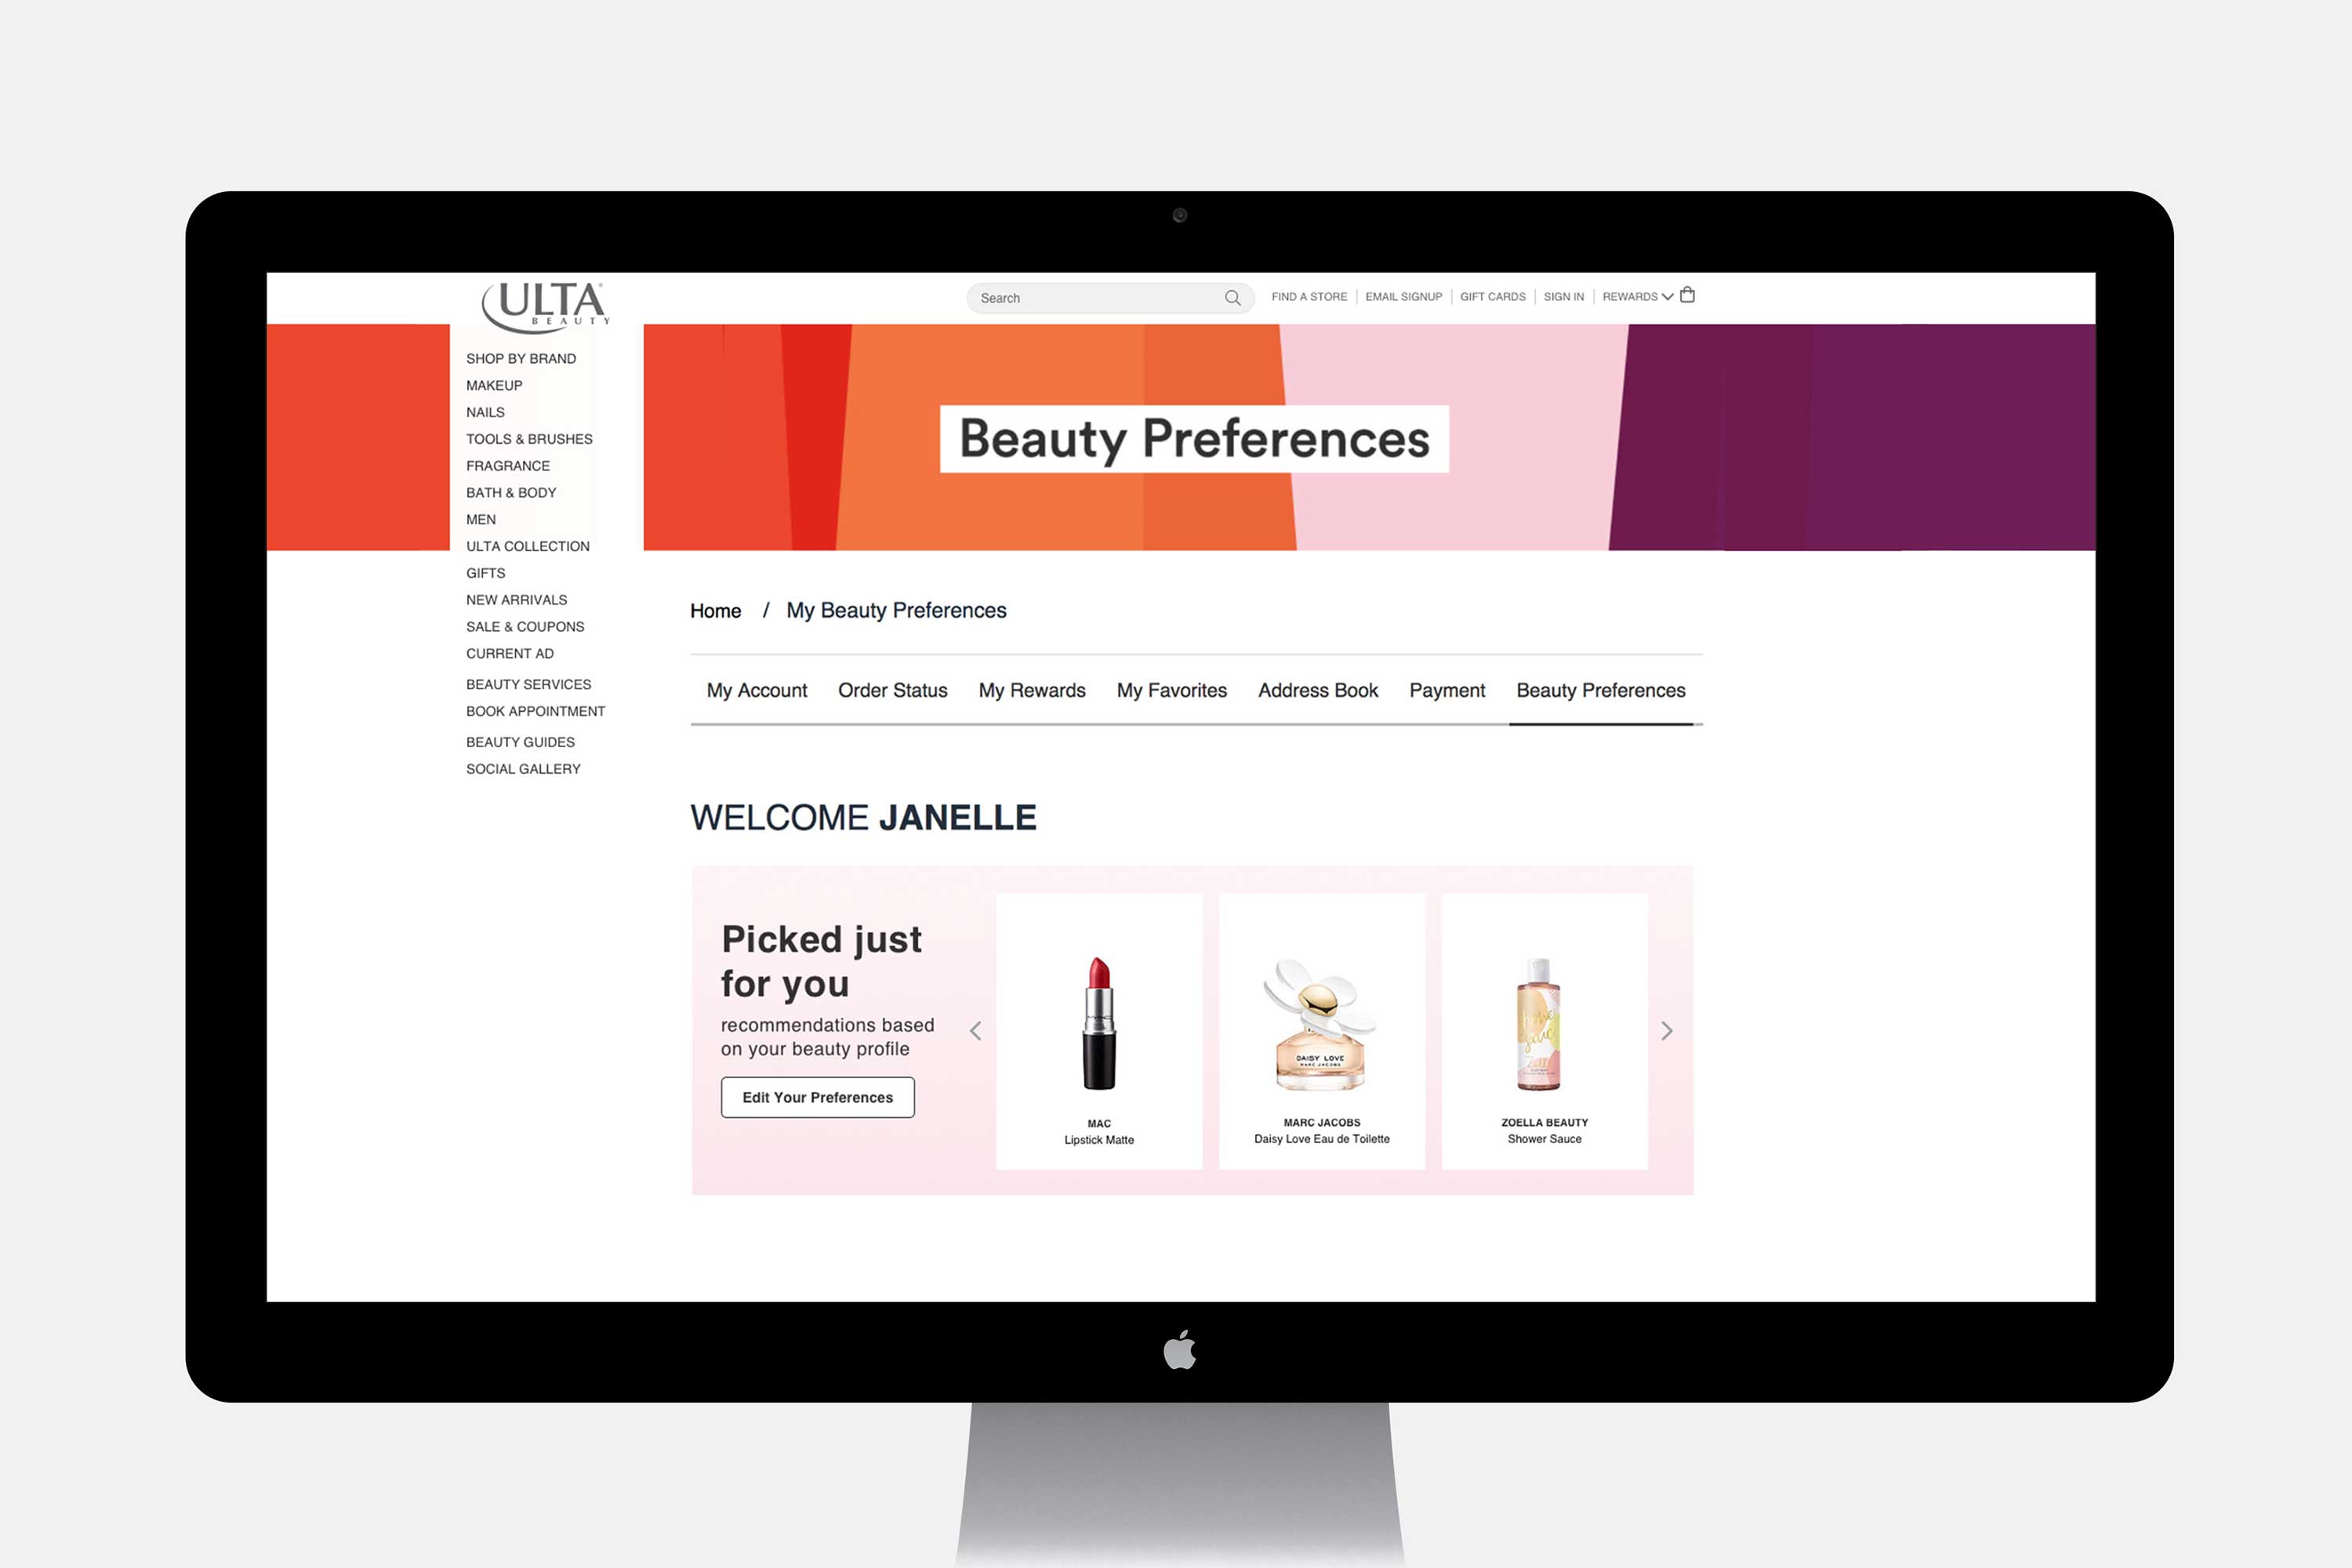 ukta beauty preferences final design recommended products